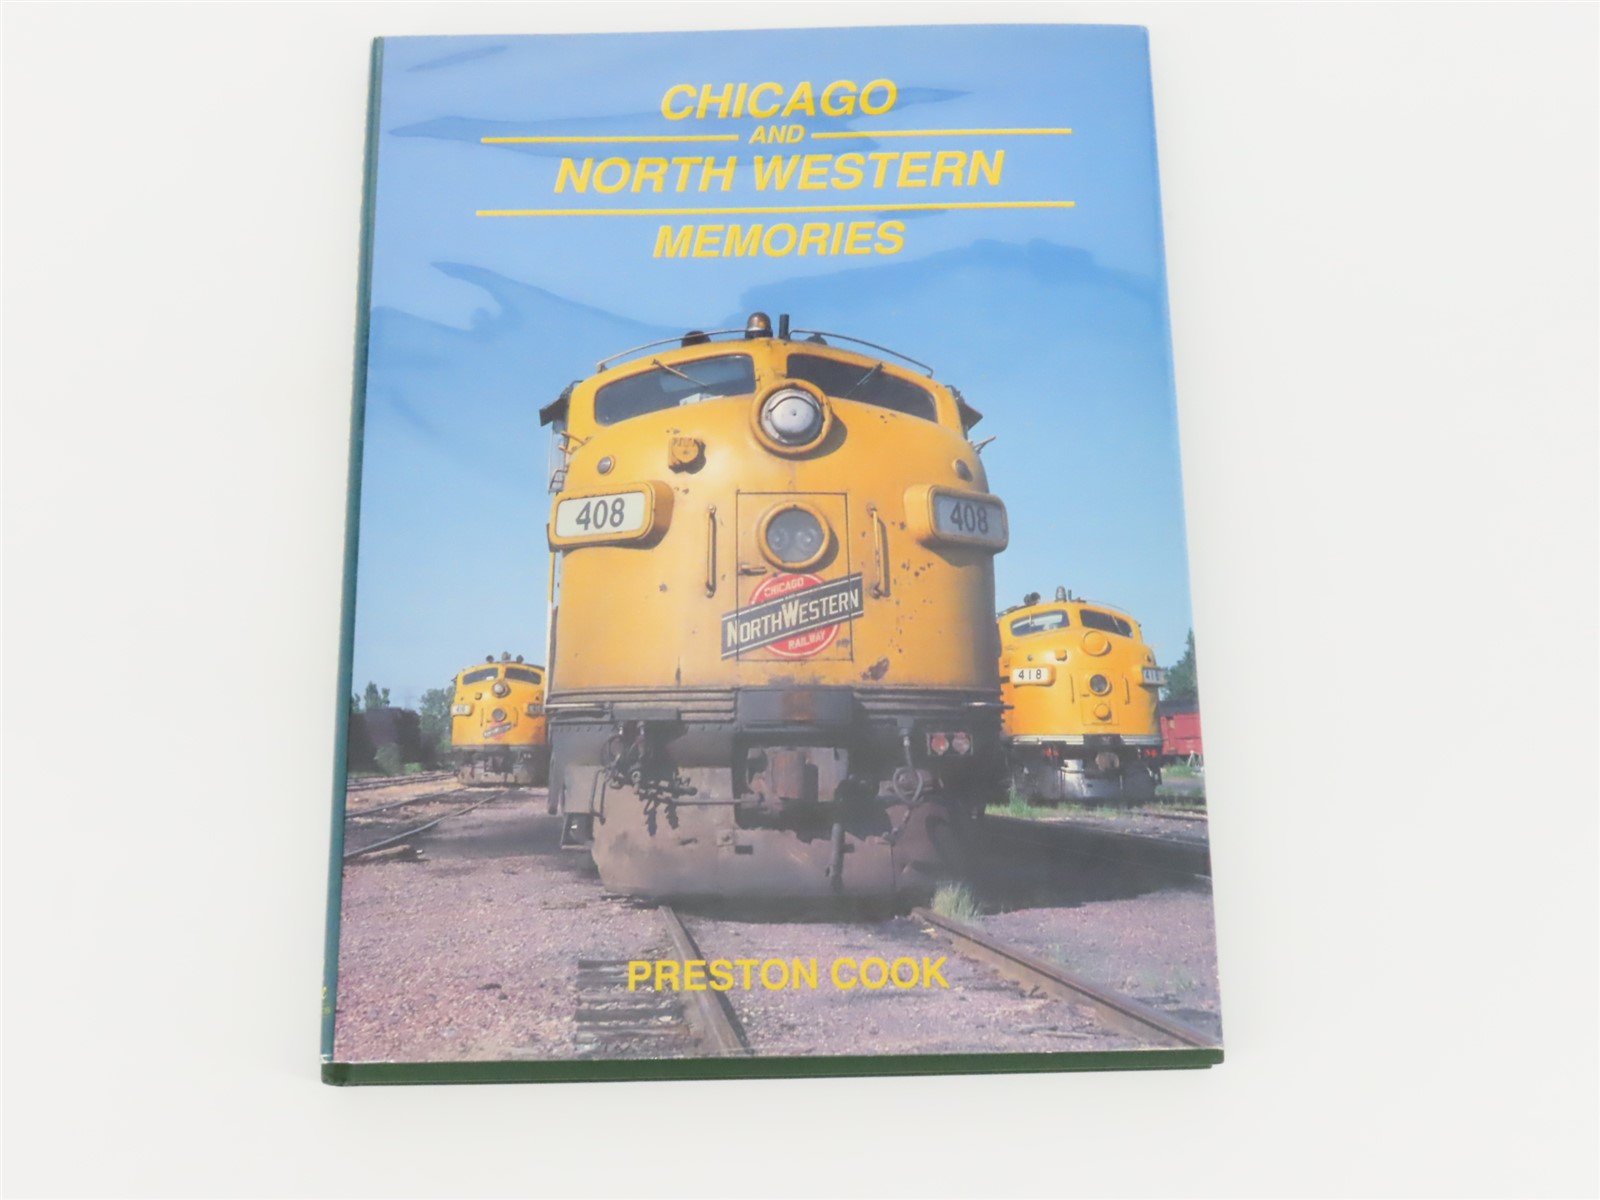 Chicago And North Western Memories 1970-1980 by Preston Cook ©1989 HC Book